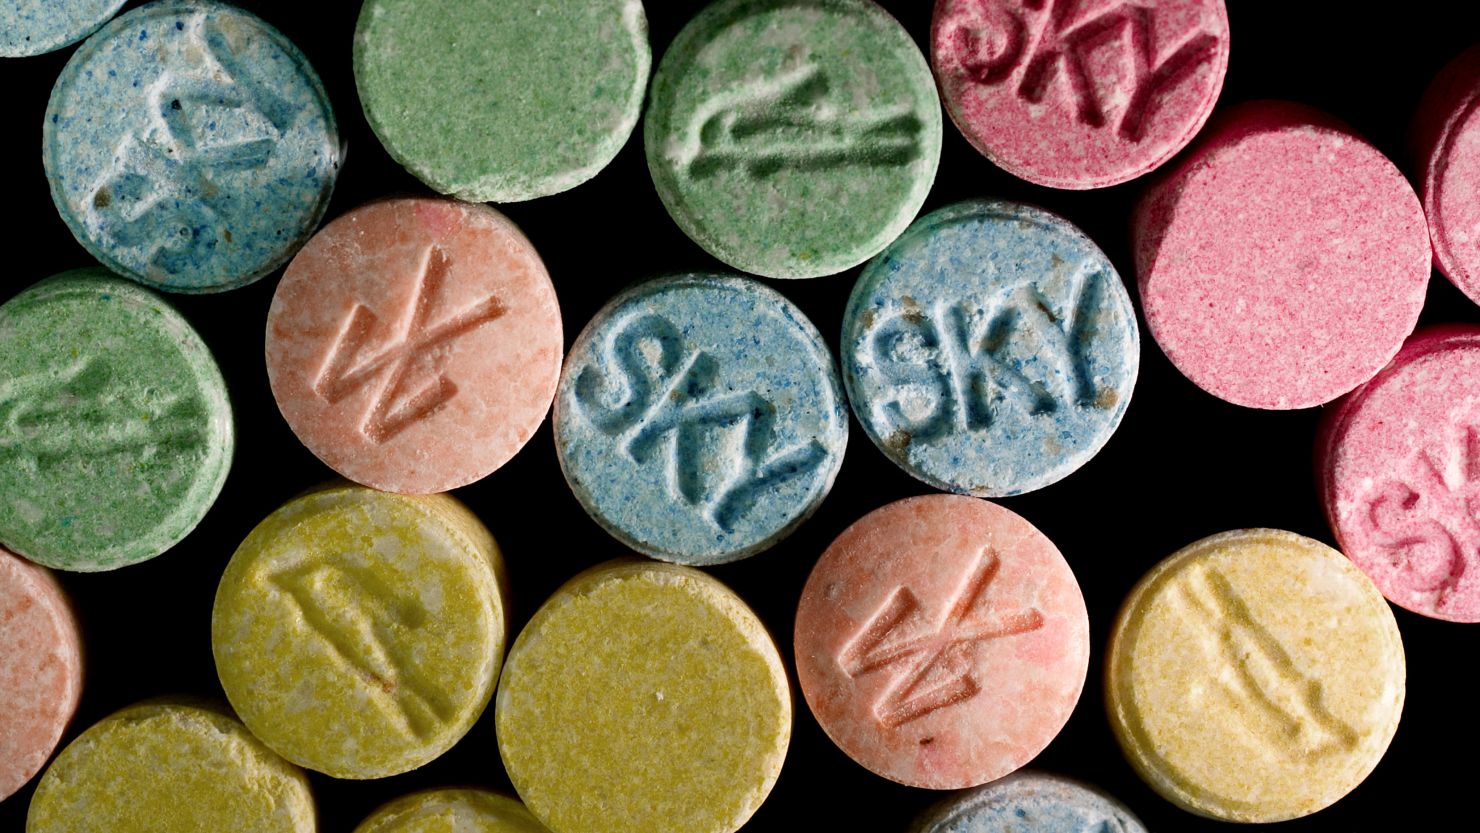 An appeals court ruling made it temporarily legal to possess Ecstasy and other drugs in Ireland.